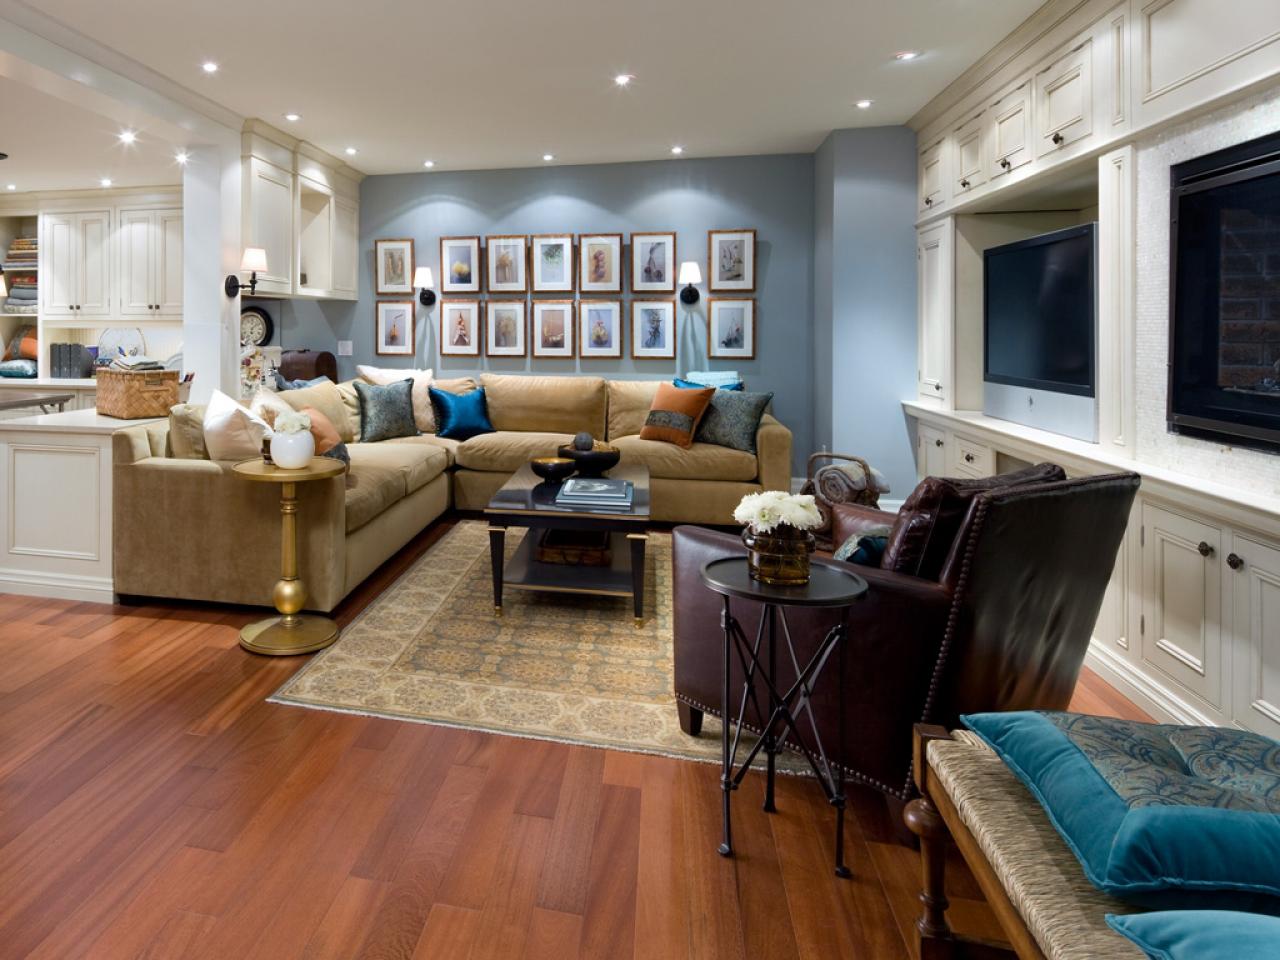 Wood Flooring In The Basement, Best Basement Flooring For Warmth